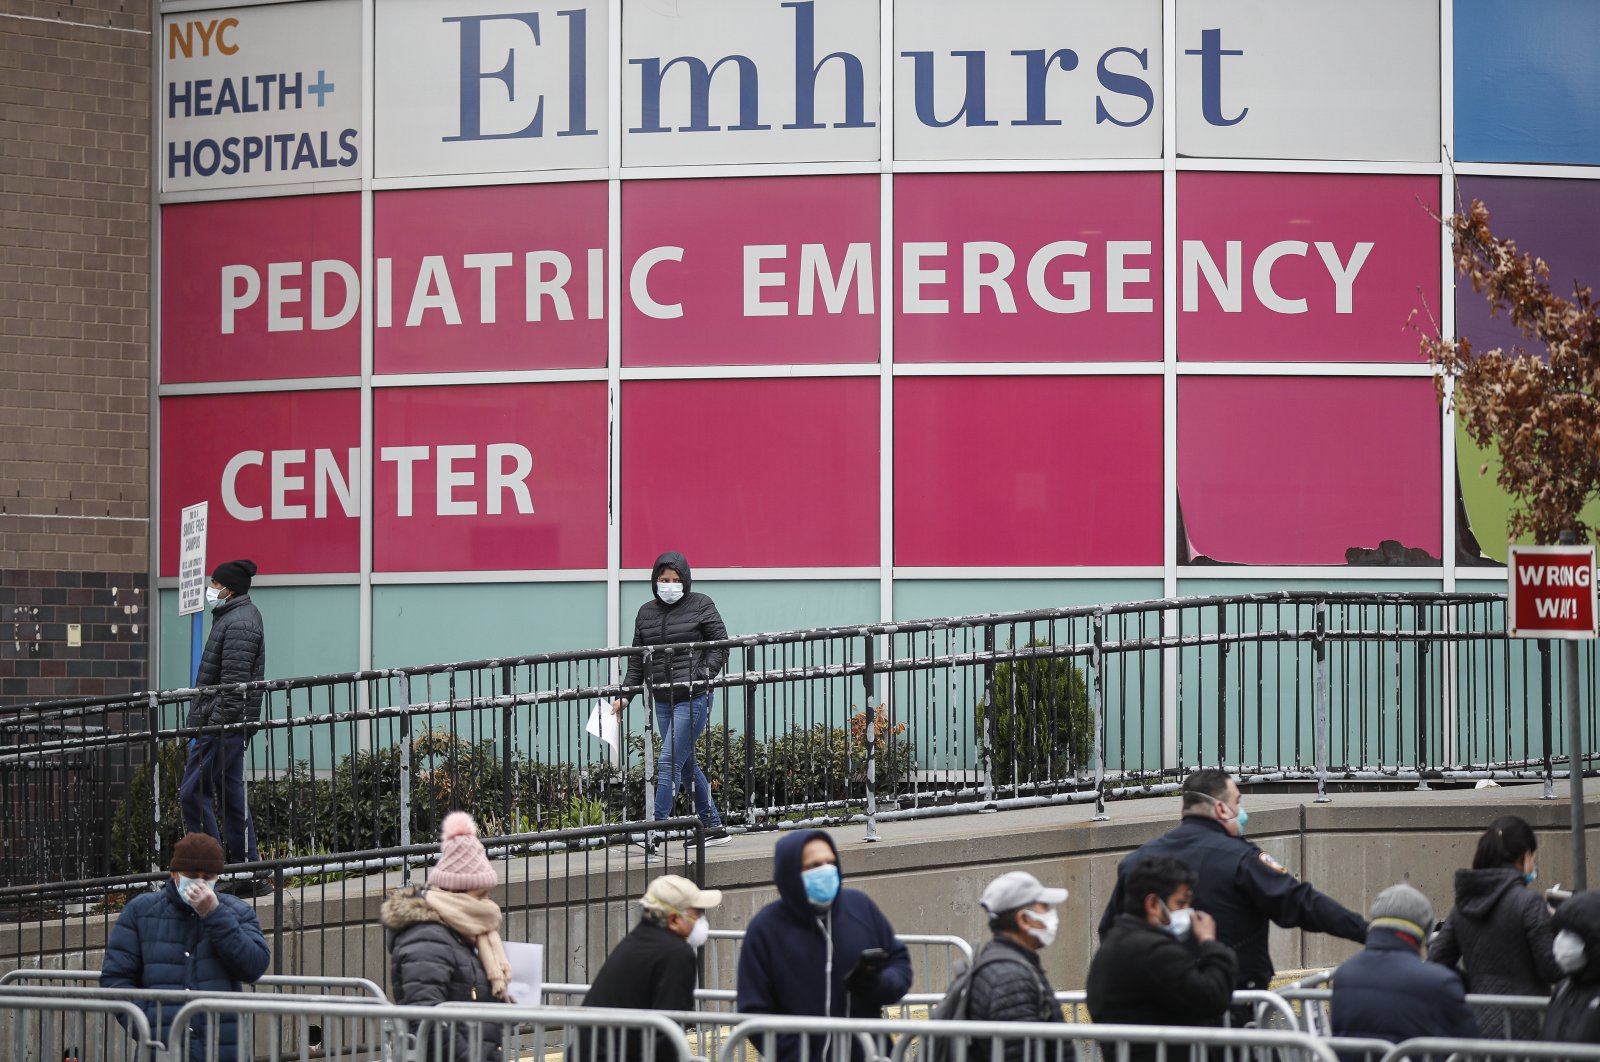 A woman exits a COVID-19 testing site while hundreds wait in line at Elmhurst Hospital Center, New York, Wednesday, March 25, 2020. (AP Photo)